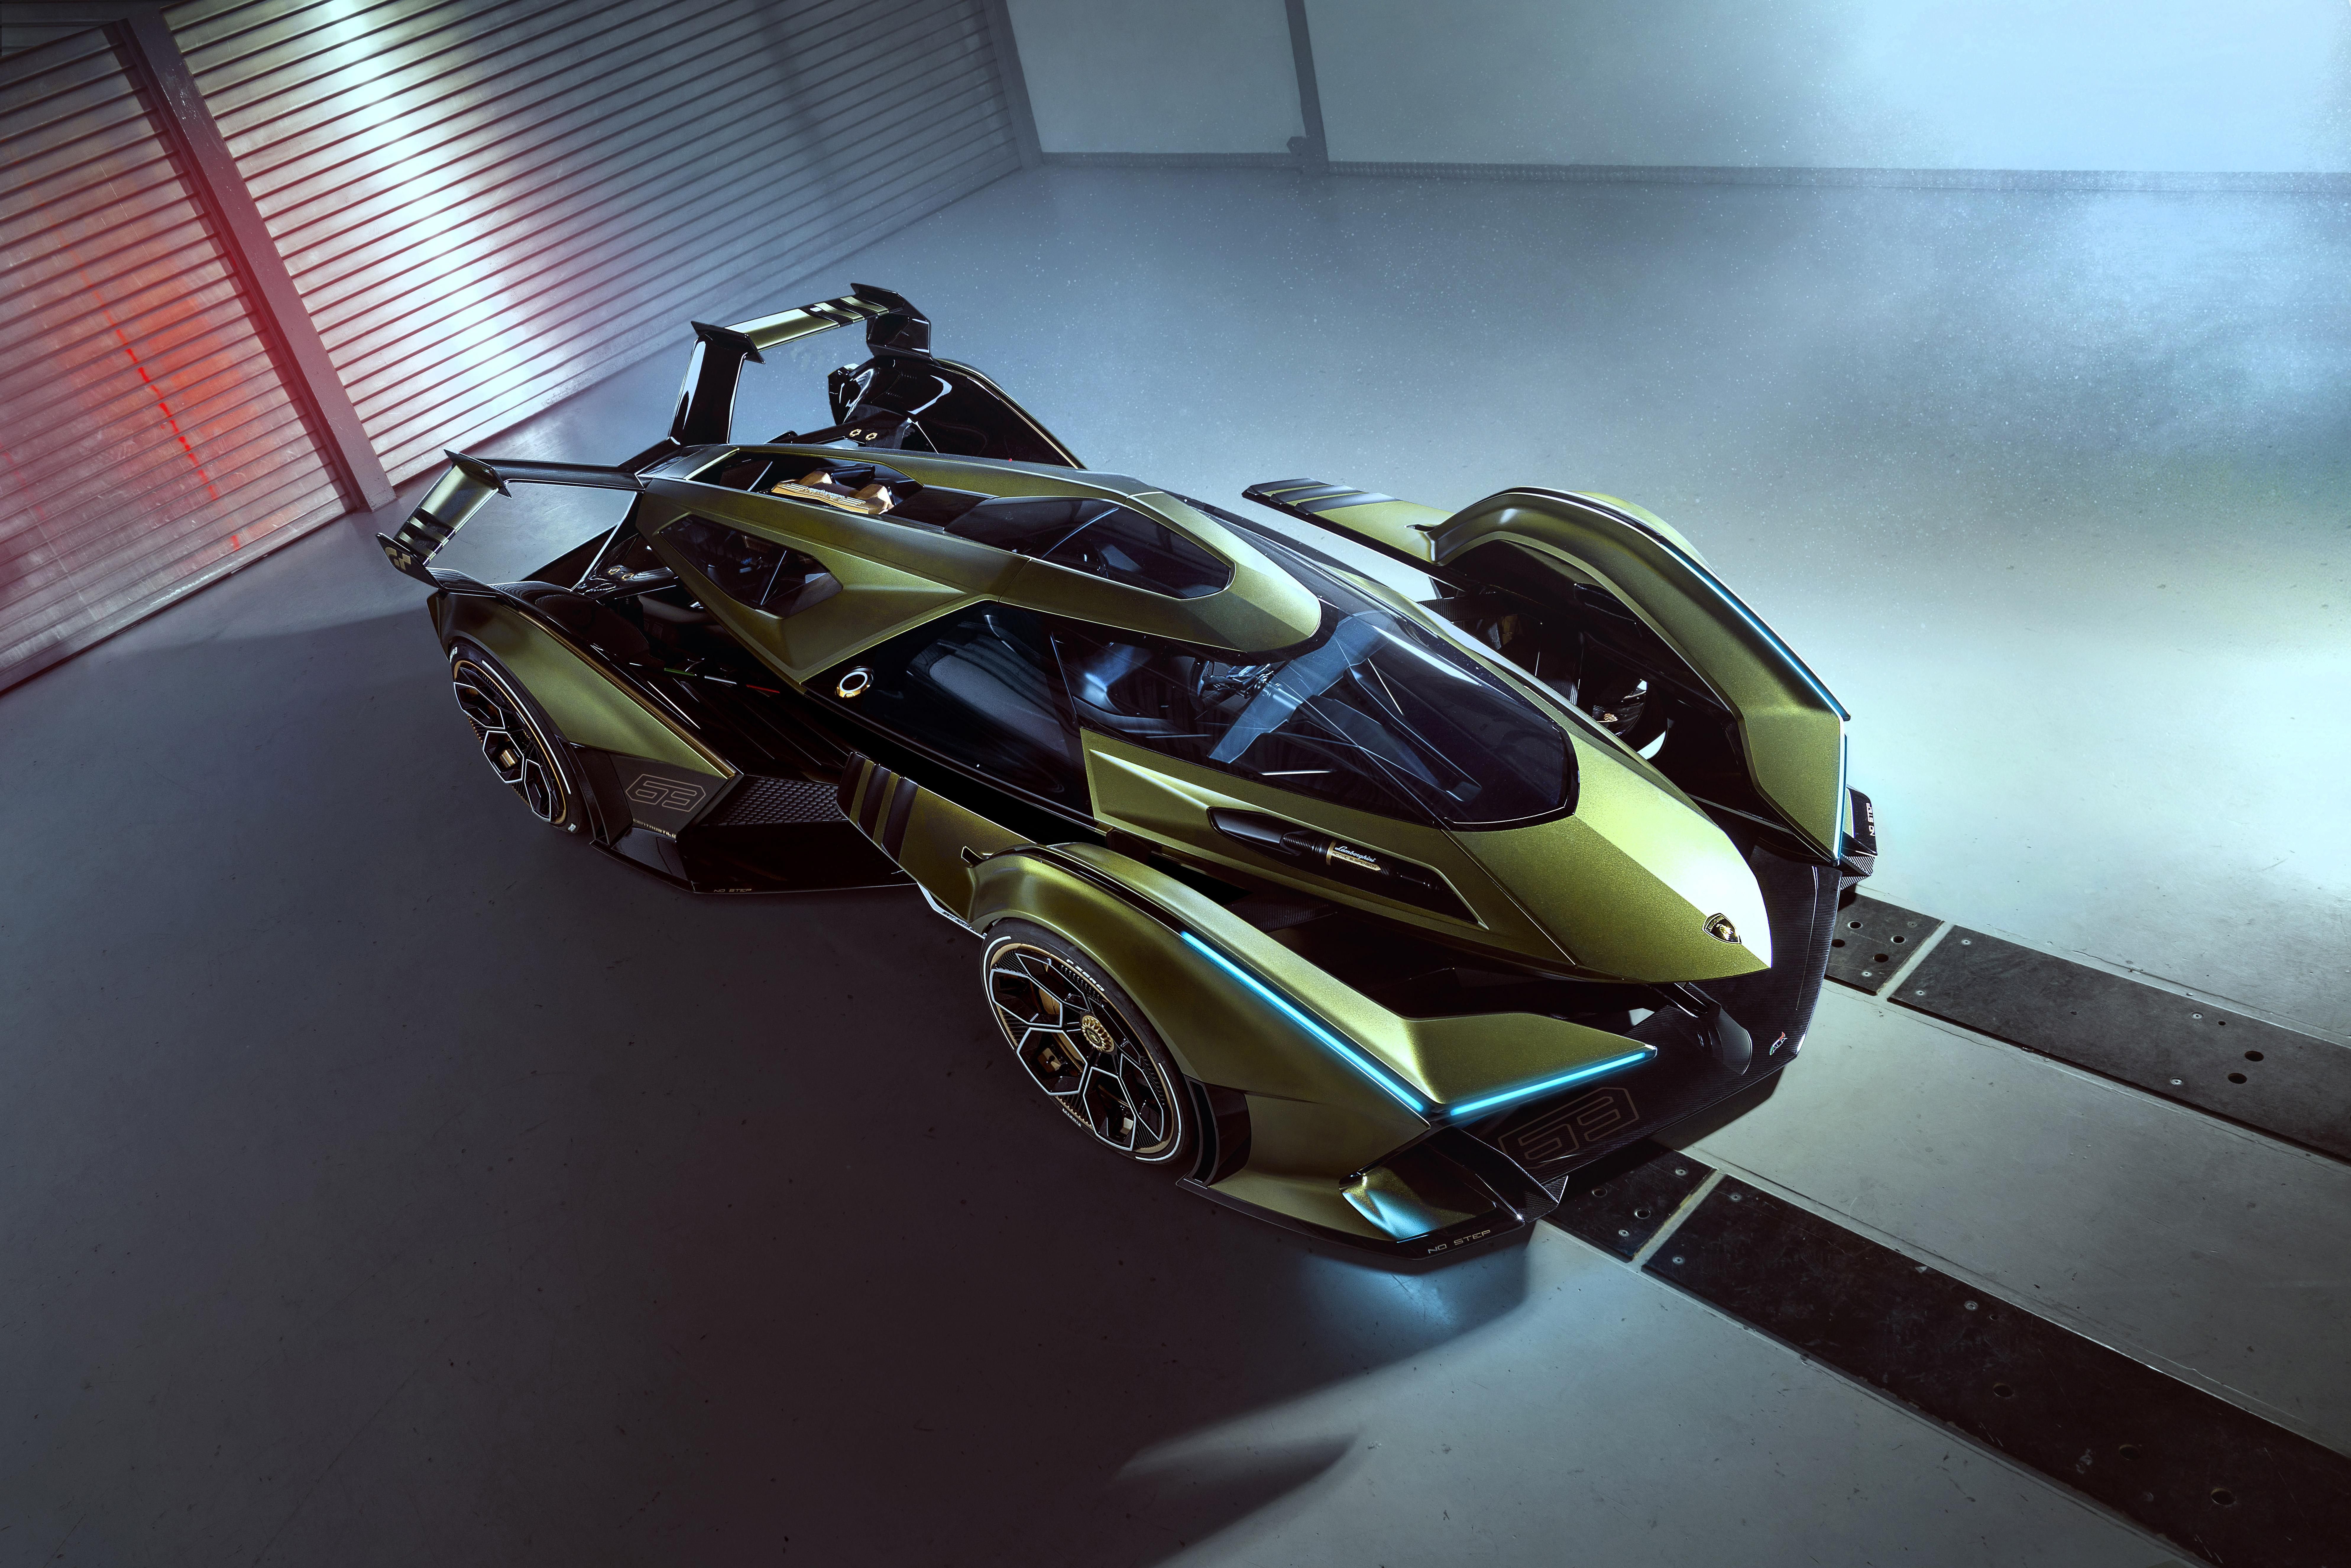 Lambo V12 Vision Gran Turismo Concept Is Basically a Fighter Jet